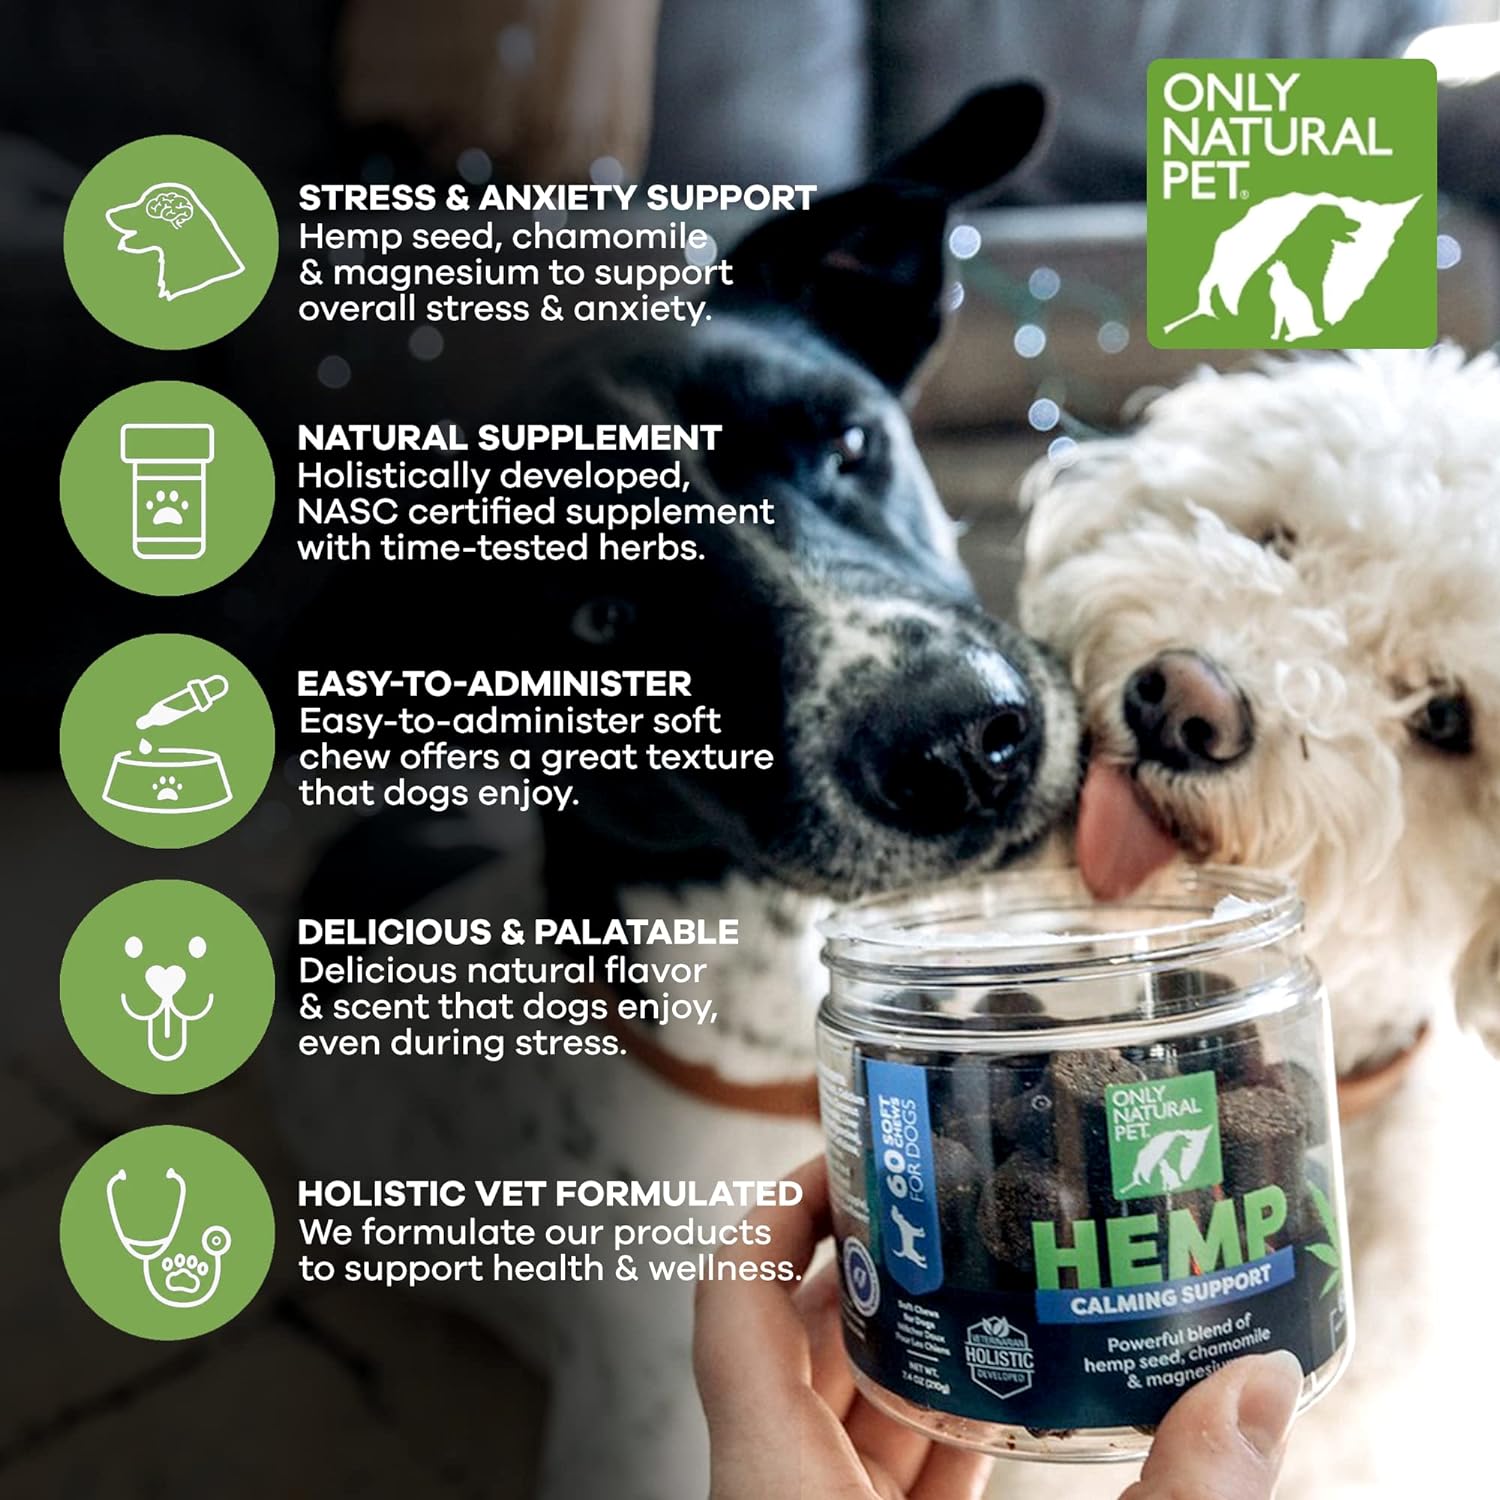 Only Natural Pet - Natural Hemp Soft Chew Bites for Dog Stress & Anxiety Relief - L-Theanine, Chamomile & Lemon Balm - Hemp Oil Calming Chews for Dogs - 60 Count : Pet Supplies